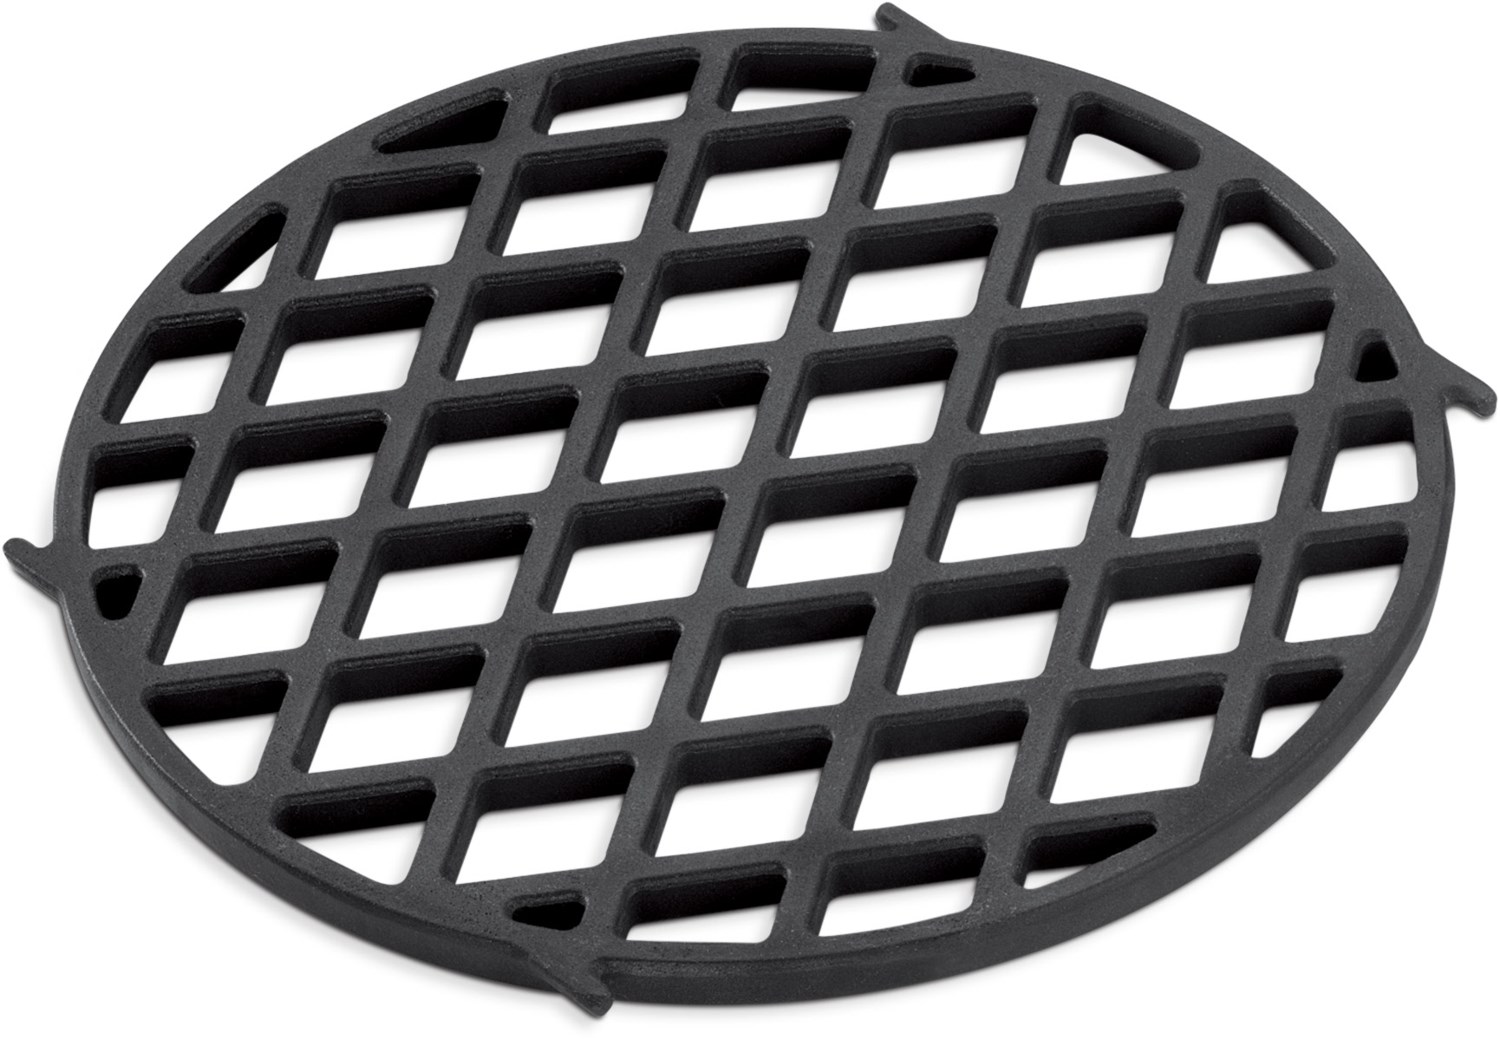 Image of Gourmet BBQ System Sear Grate 8834, Grillrost